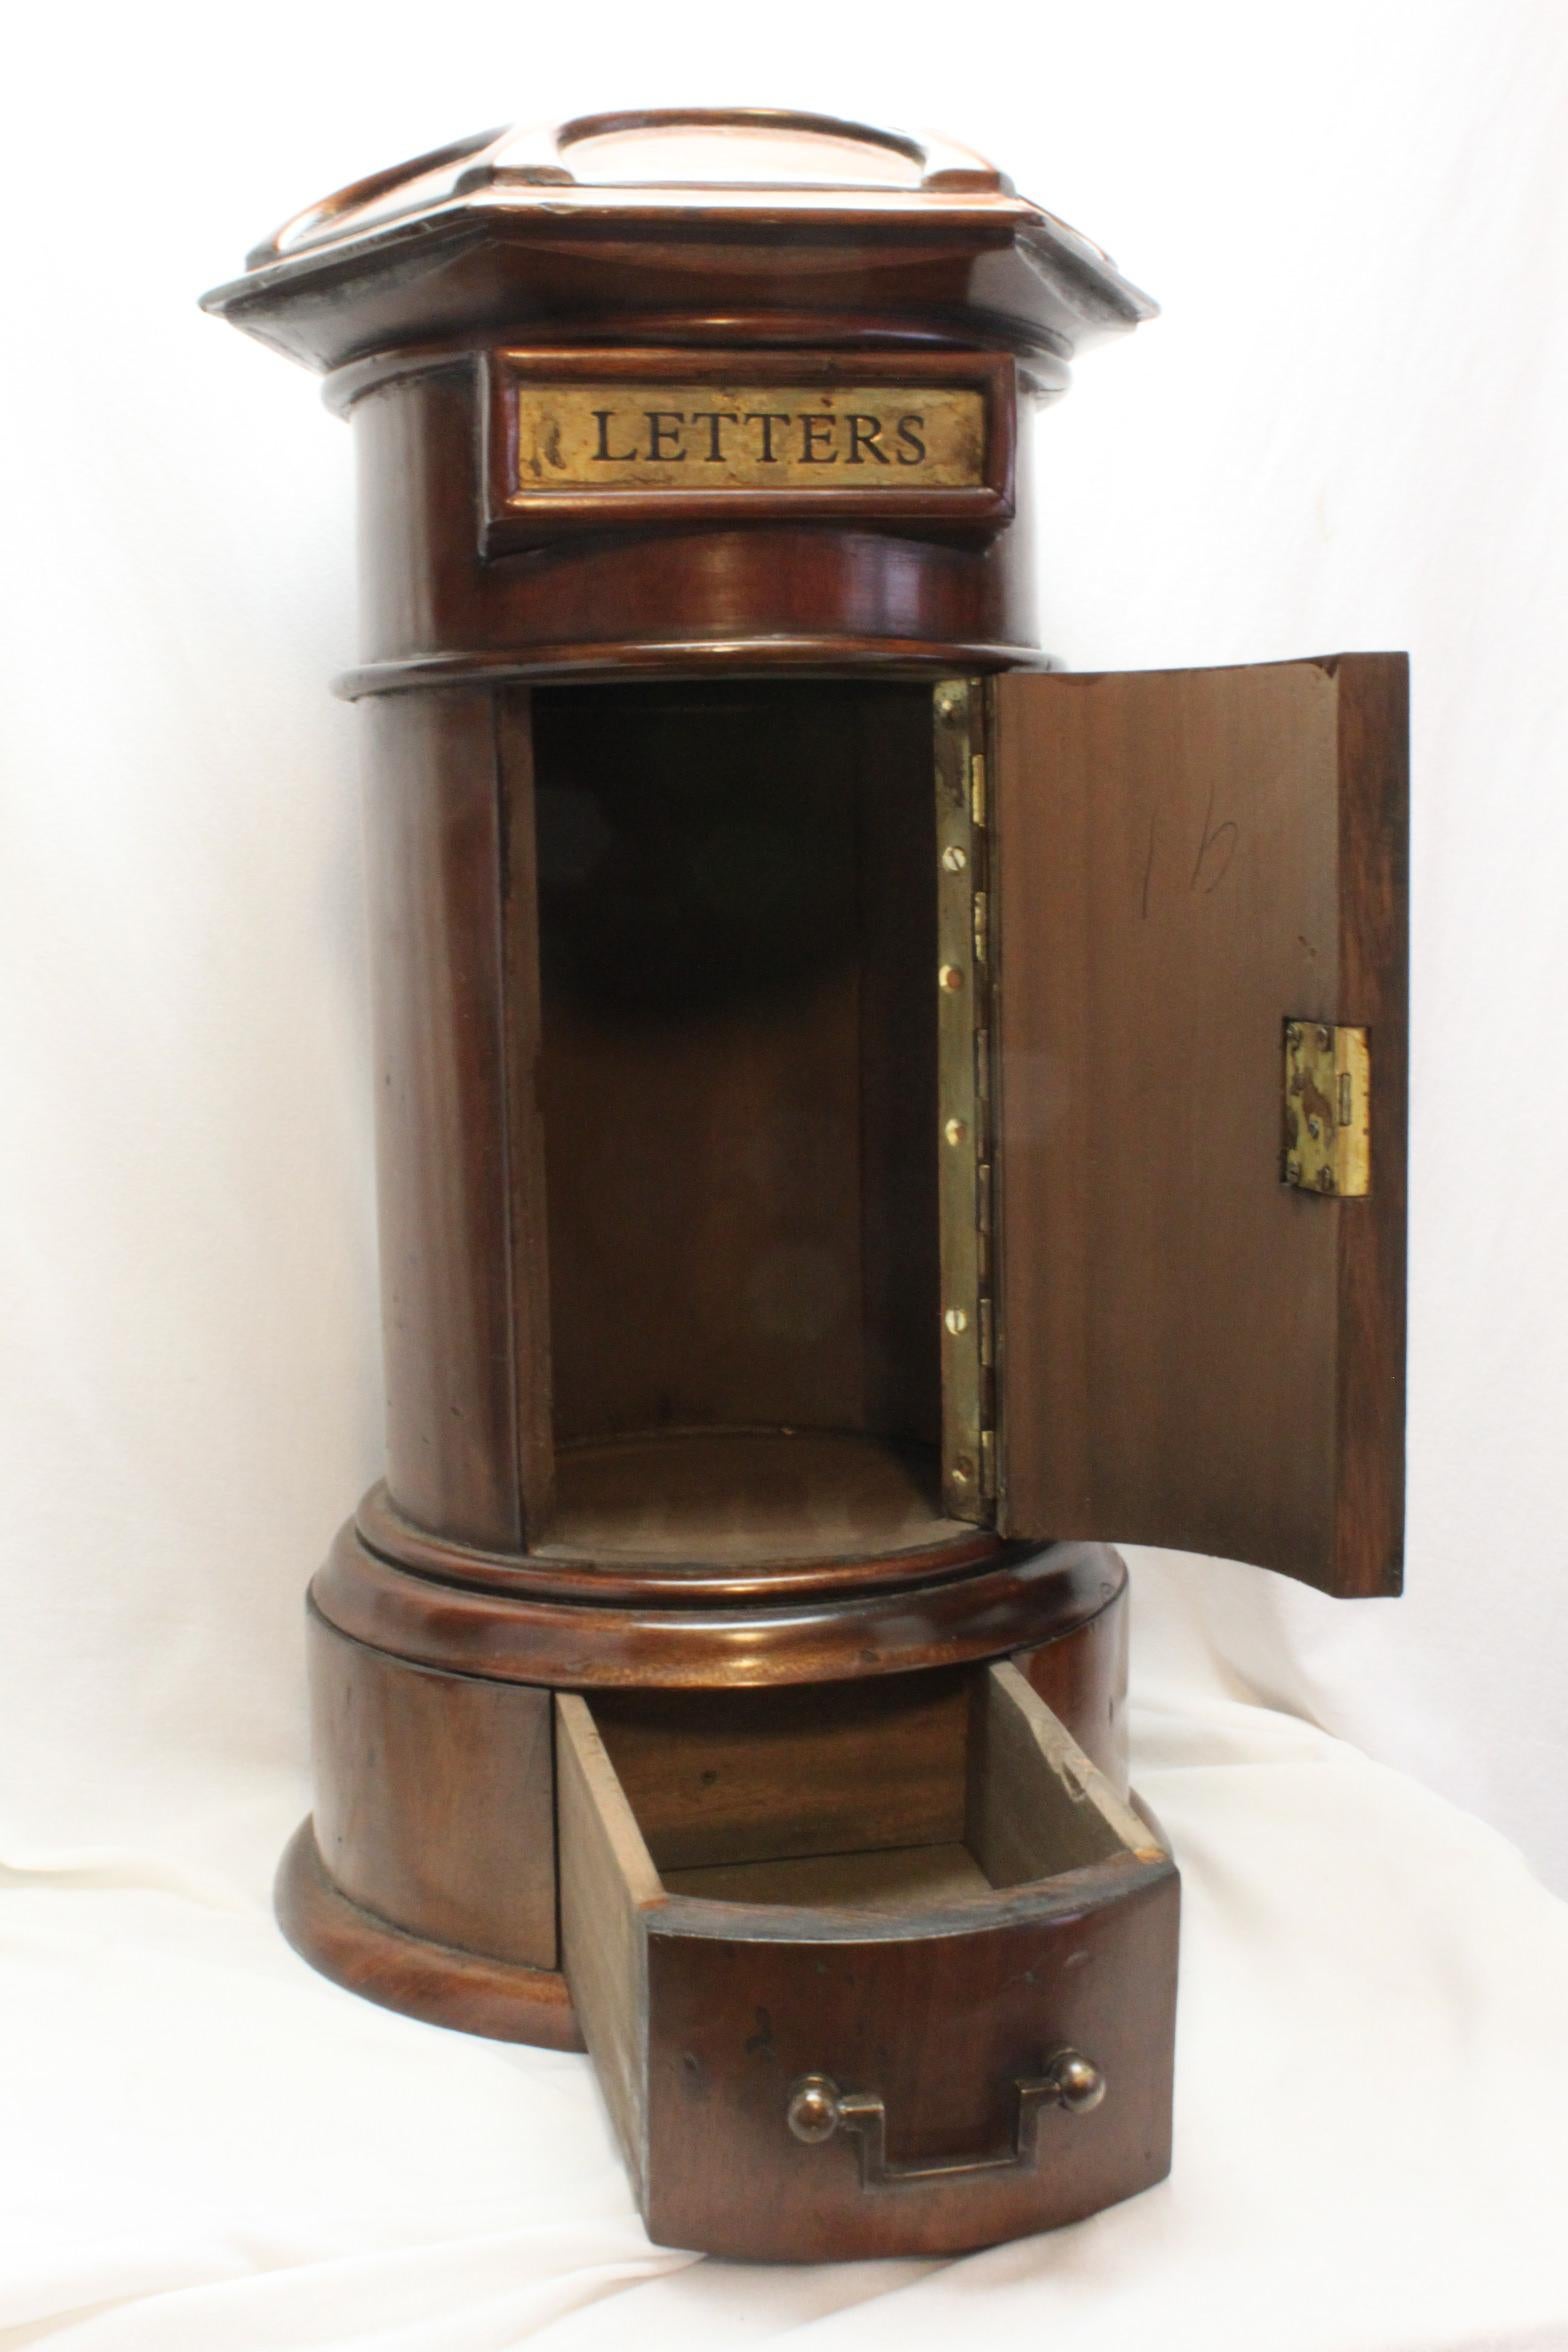 This good quality mahogany country house letter box is a 20th century reproduction of one that would have stood in a central area in a country house or a club or up market guest house where family or guests could deposit mail to be taken to a post